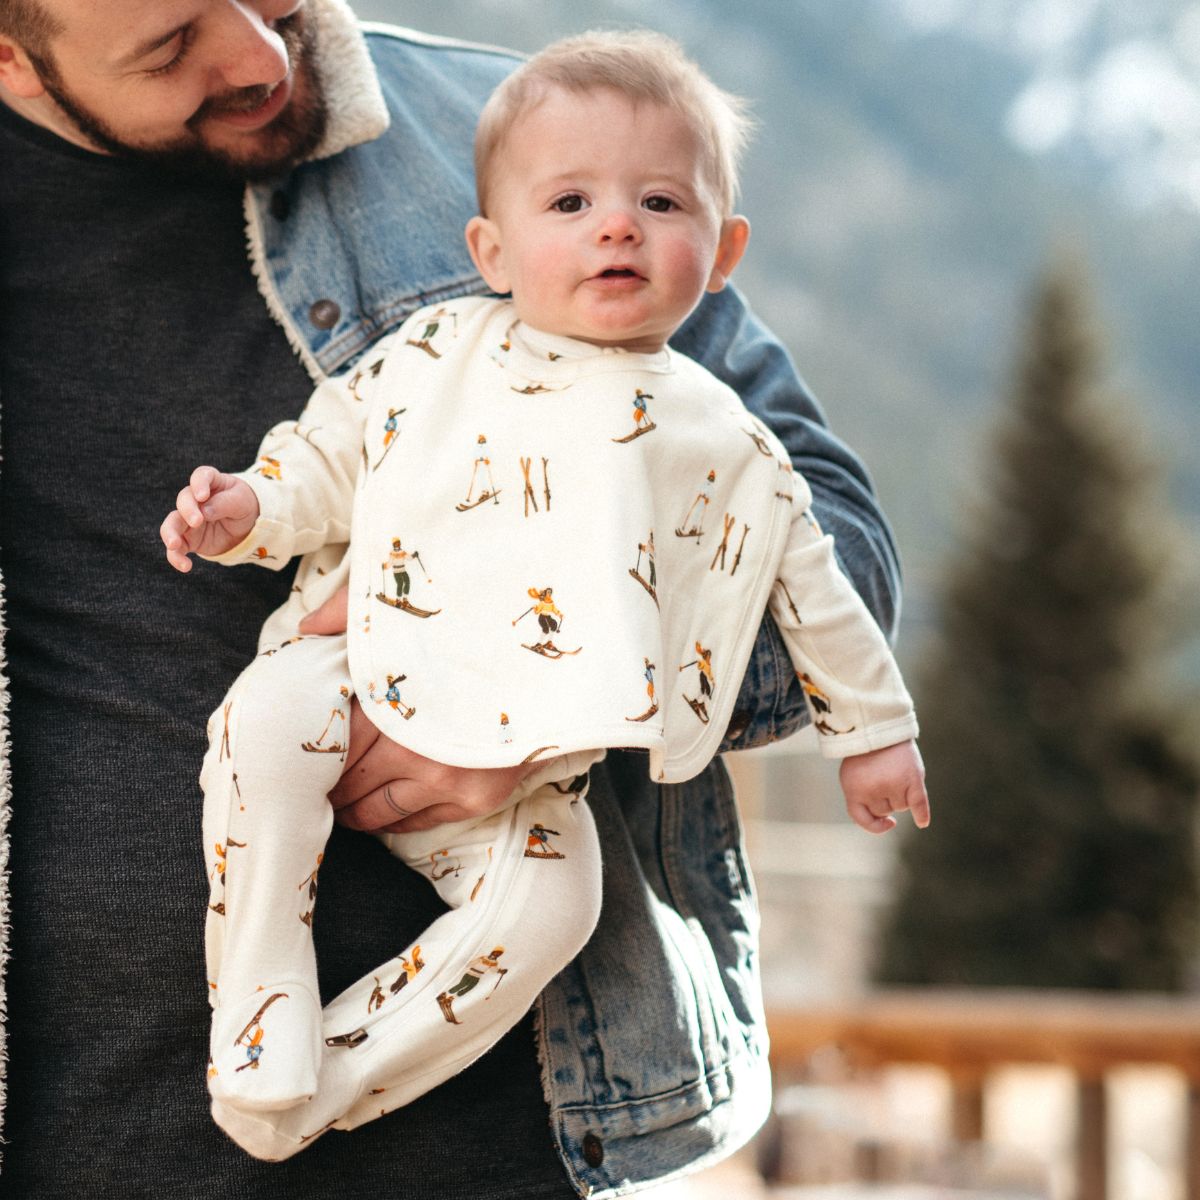 Dad and son in the snow with the baby wearing the Vintage Natural Ski print on the organic cotton Zipper Footed Romper Lifestyle and matching traditional bib by Milkbarn Kids